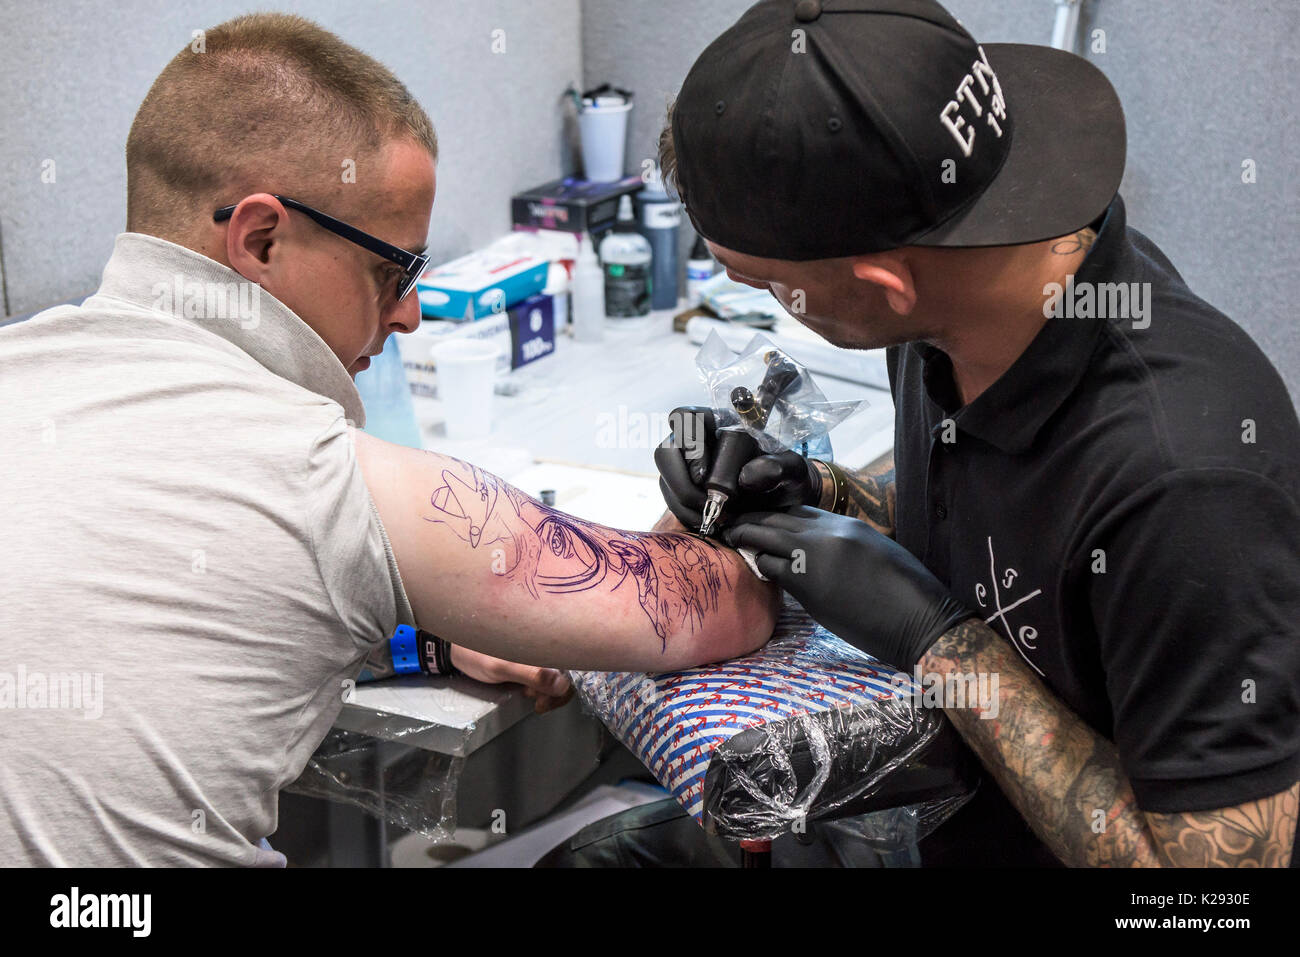 Cornwall Tattoo Convention - a man having his upper arm tattooed at the Cornwall Tattoo Convention Stock Photo - Alamy